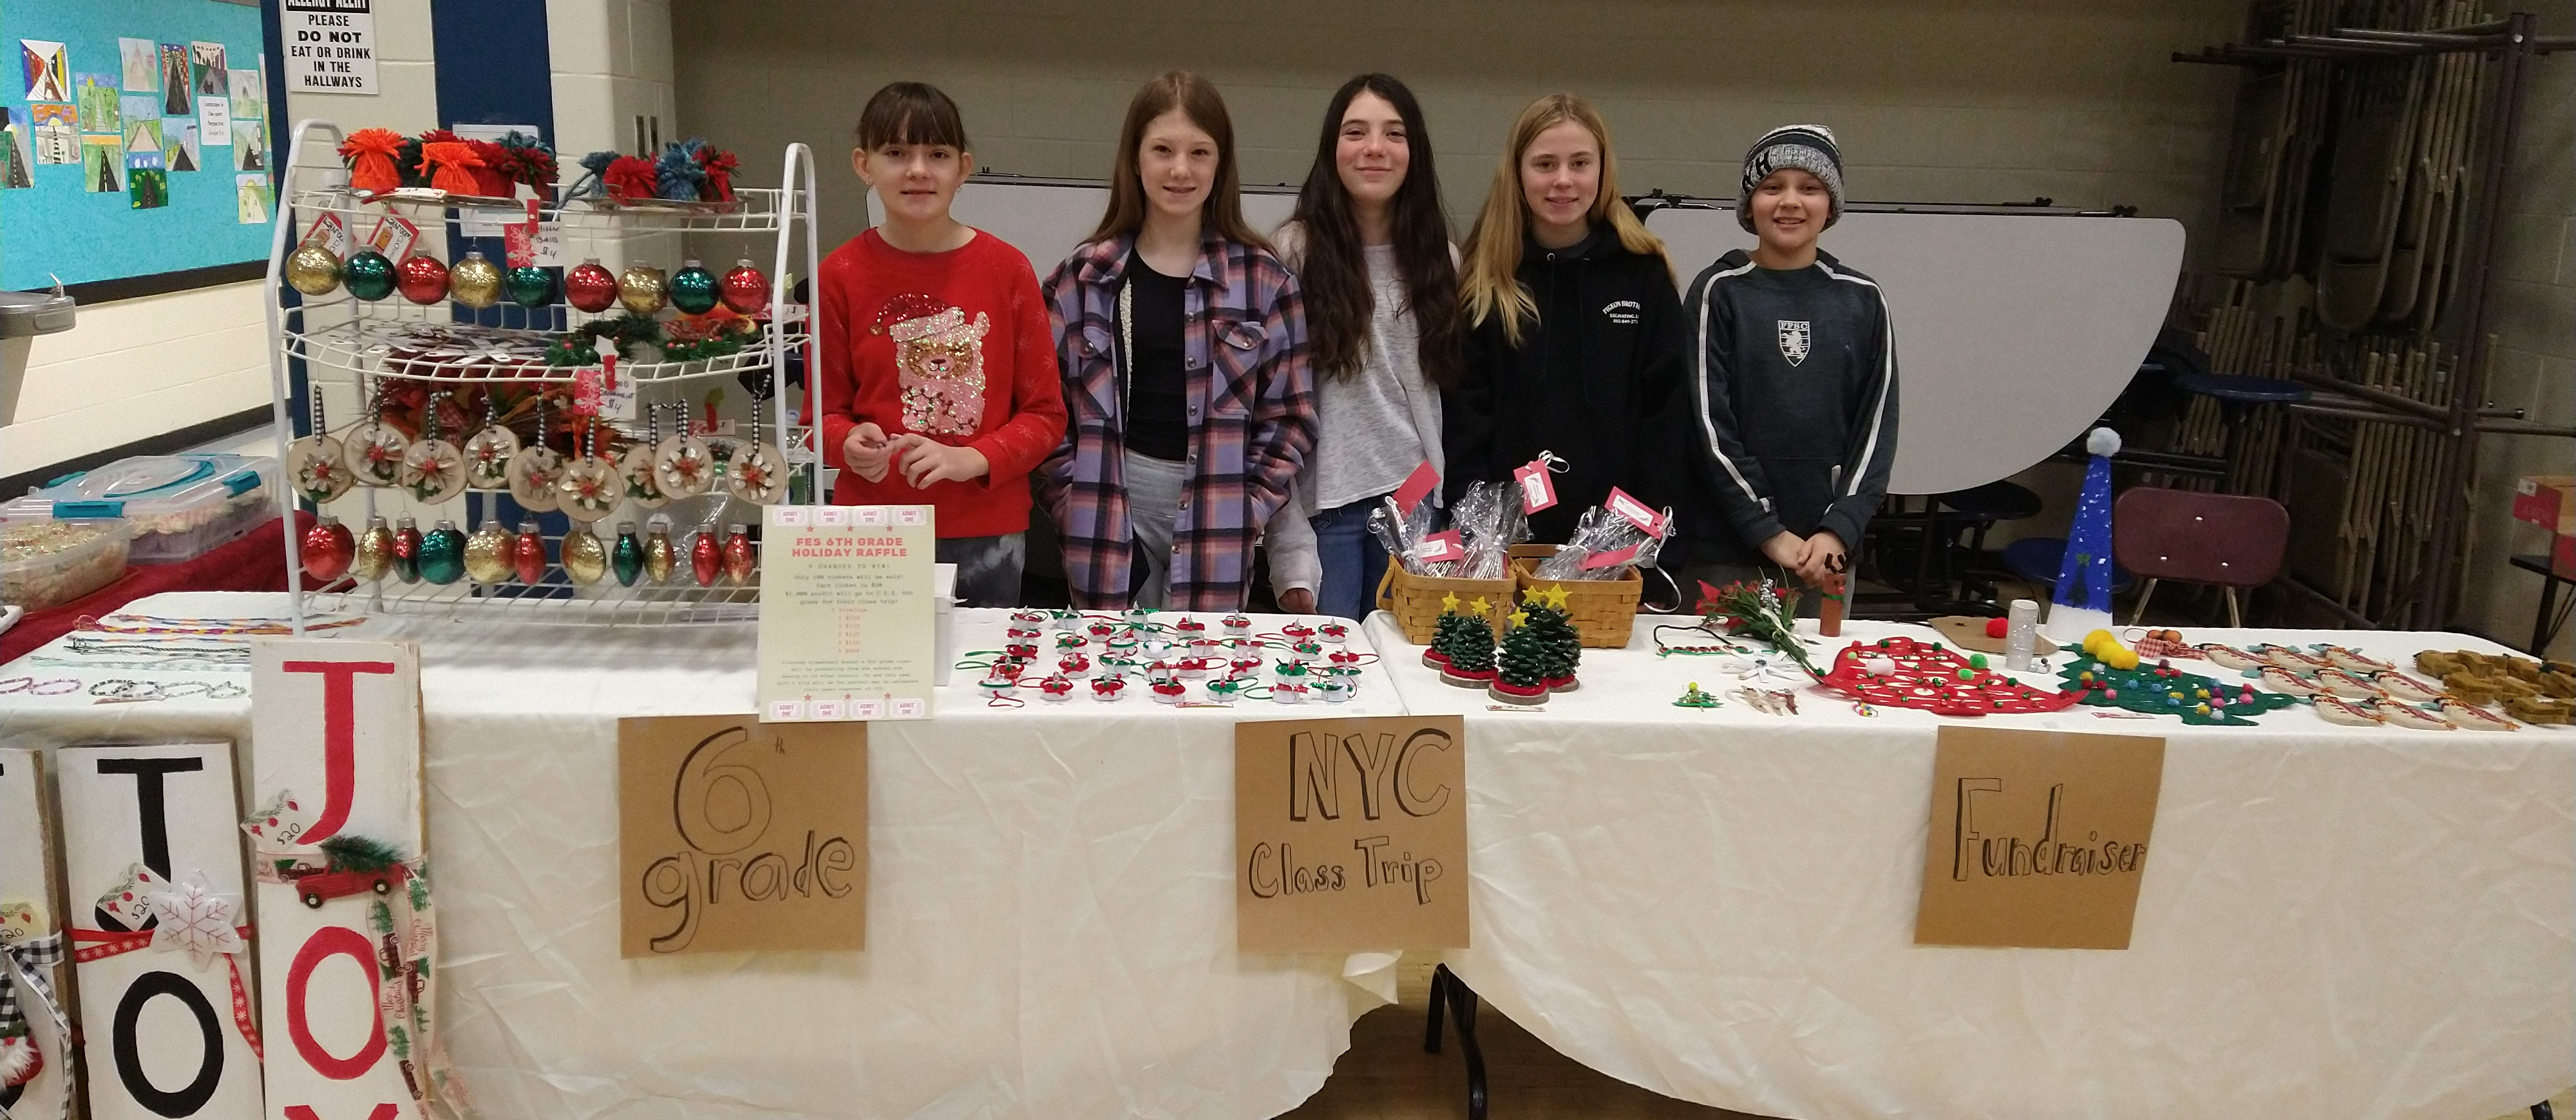 6th Graders raising money for their class trip to NYC